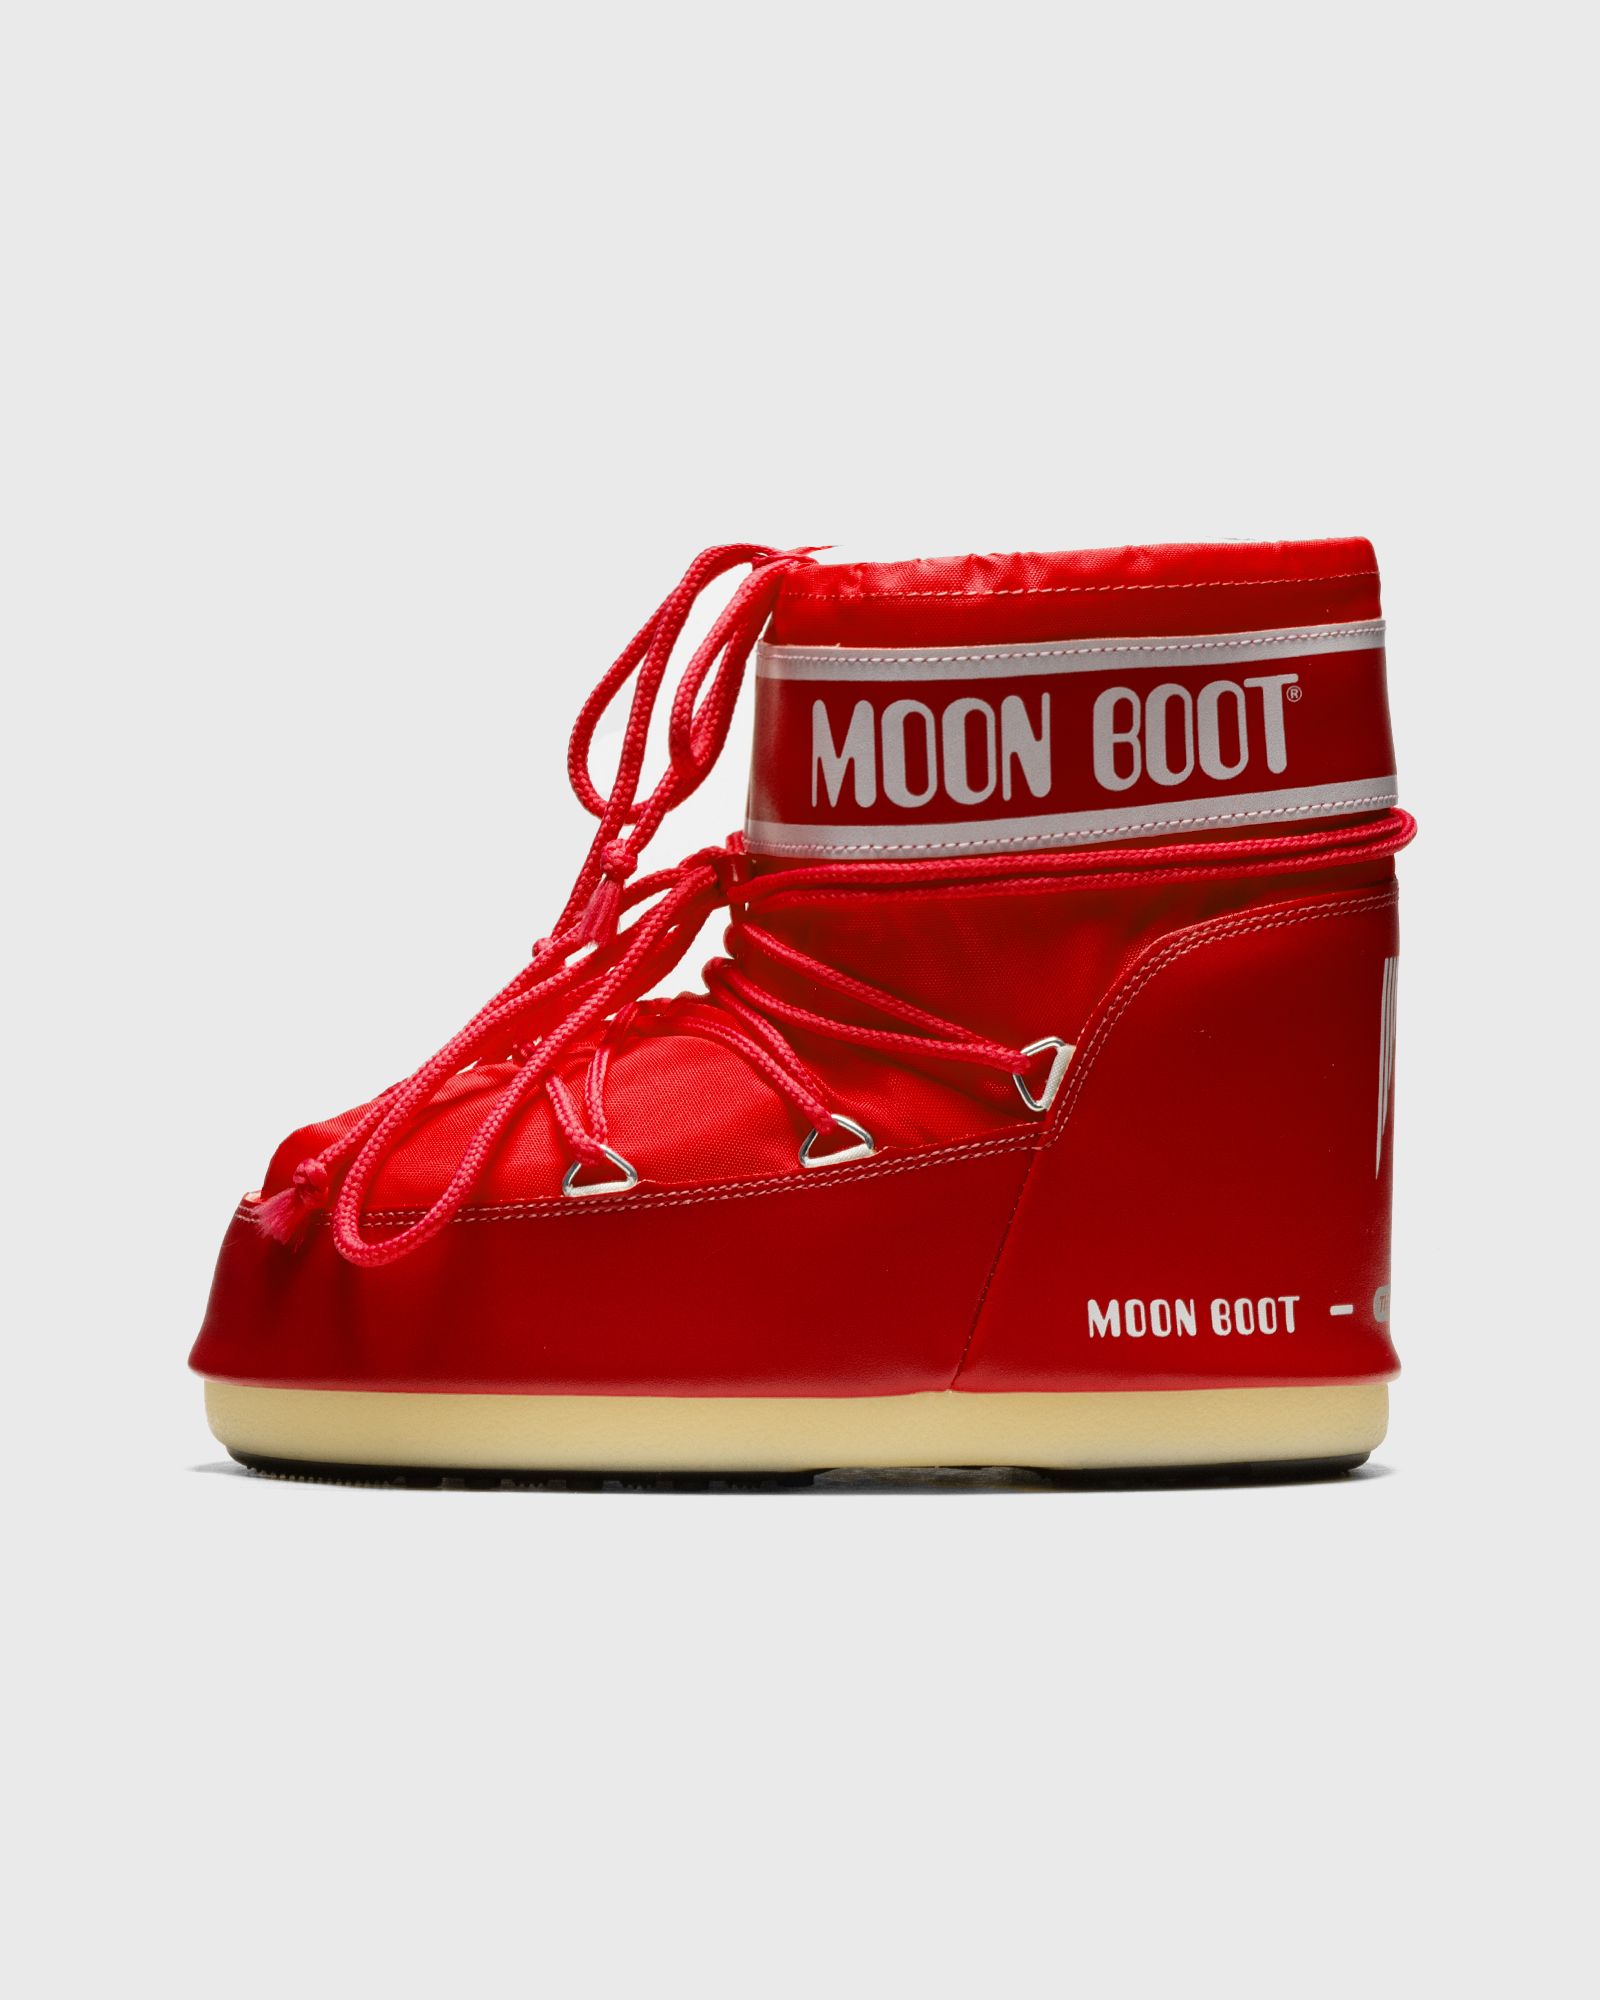 Moon Boot - icon low nylon men boots red in größe:42-44